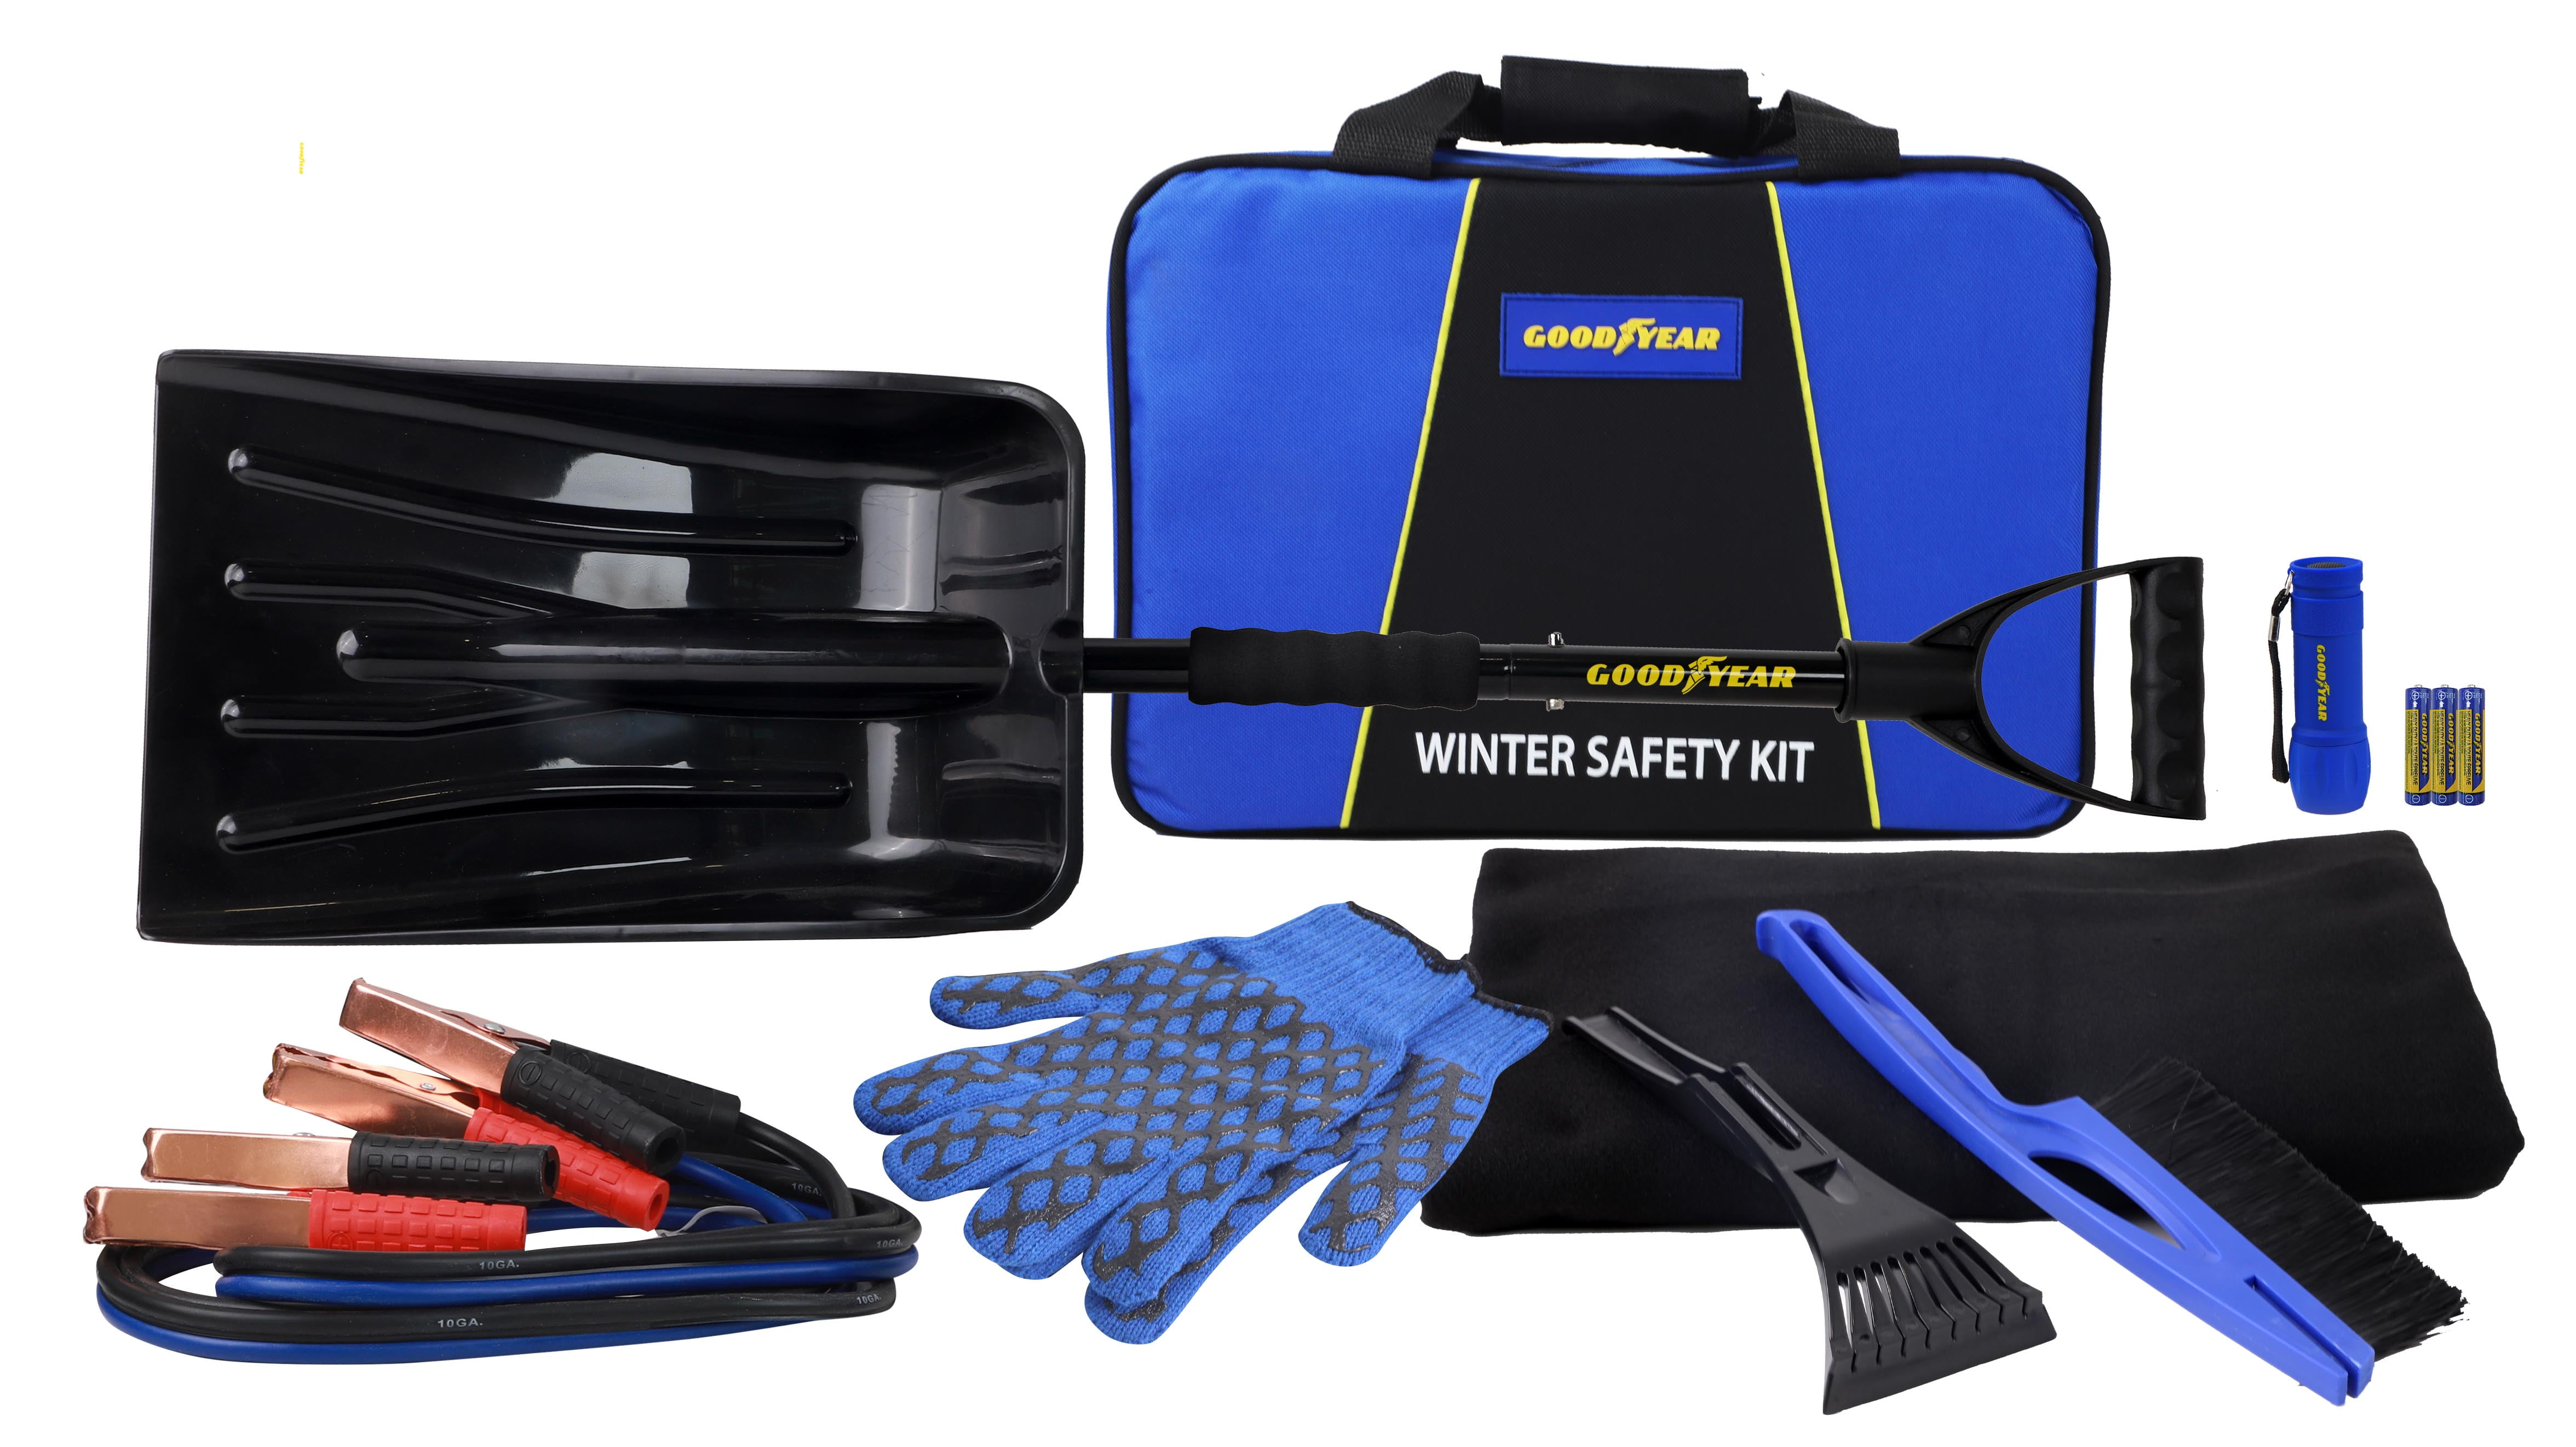 Goodyear Winter Safety Kit with Booster Cables, Snow Shovel